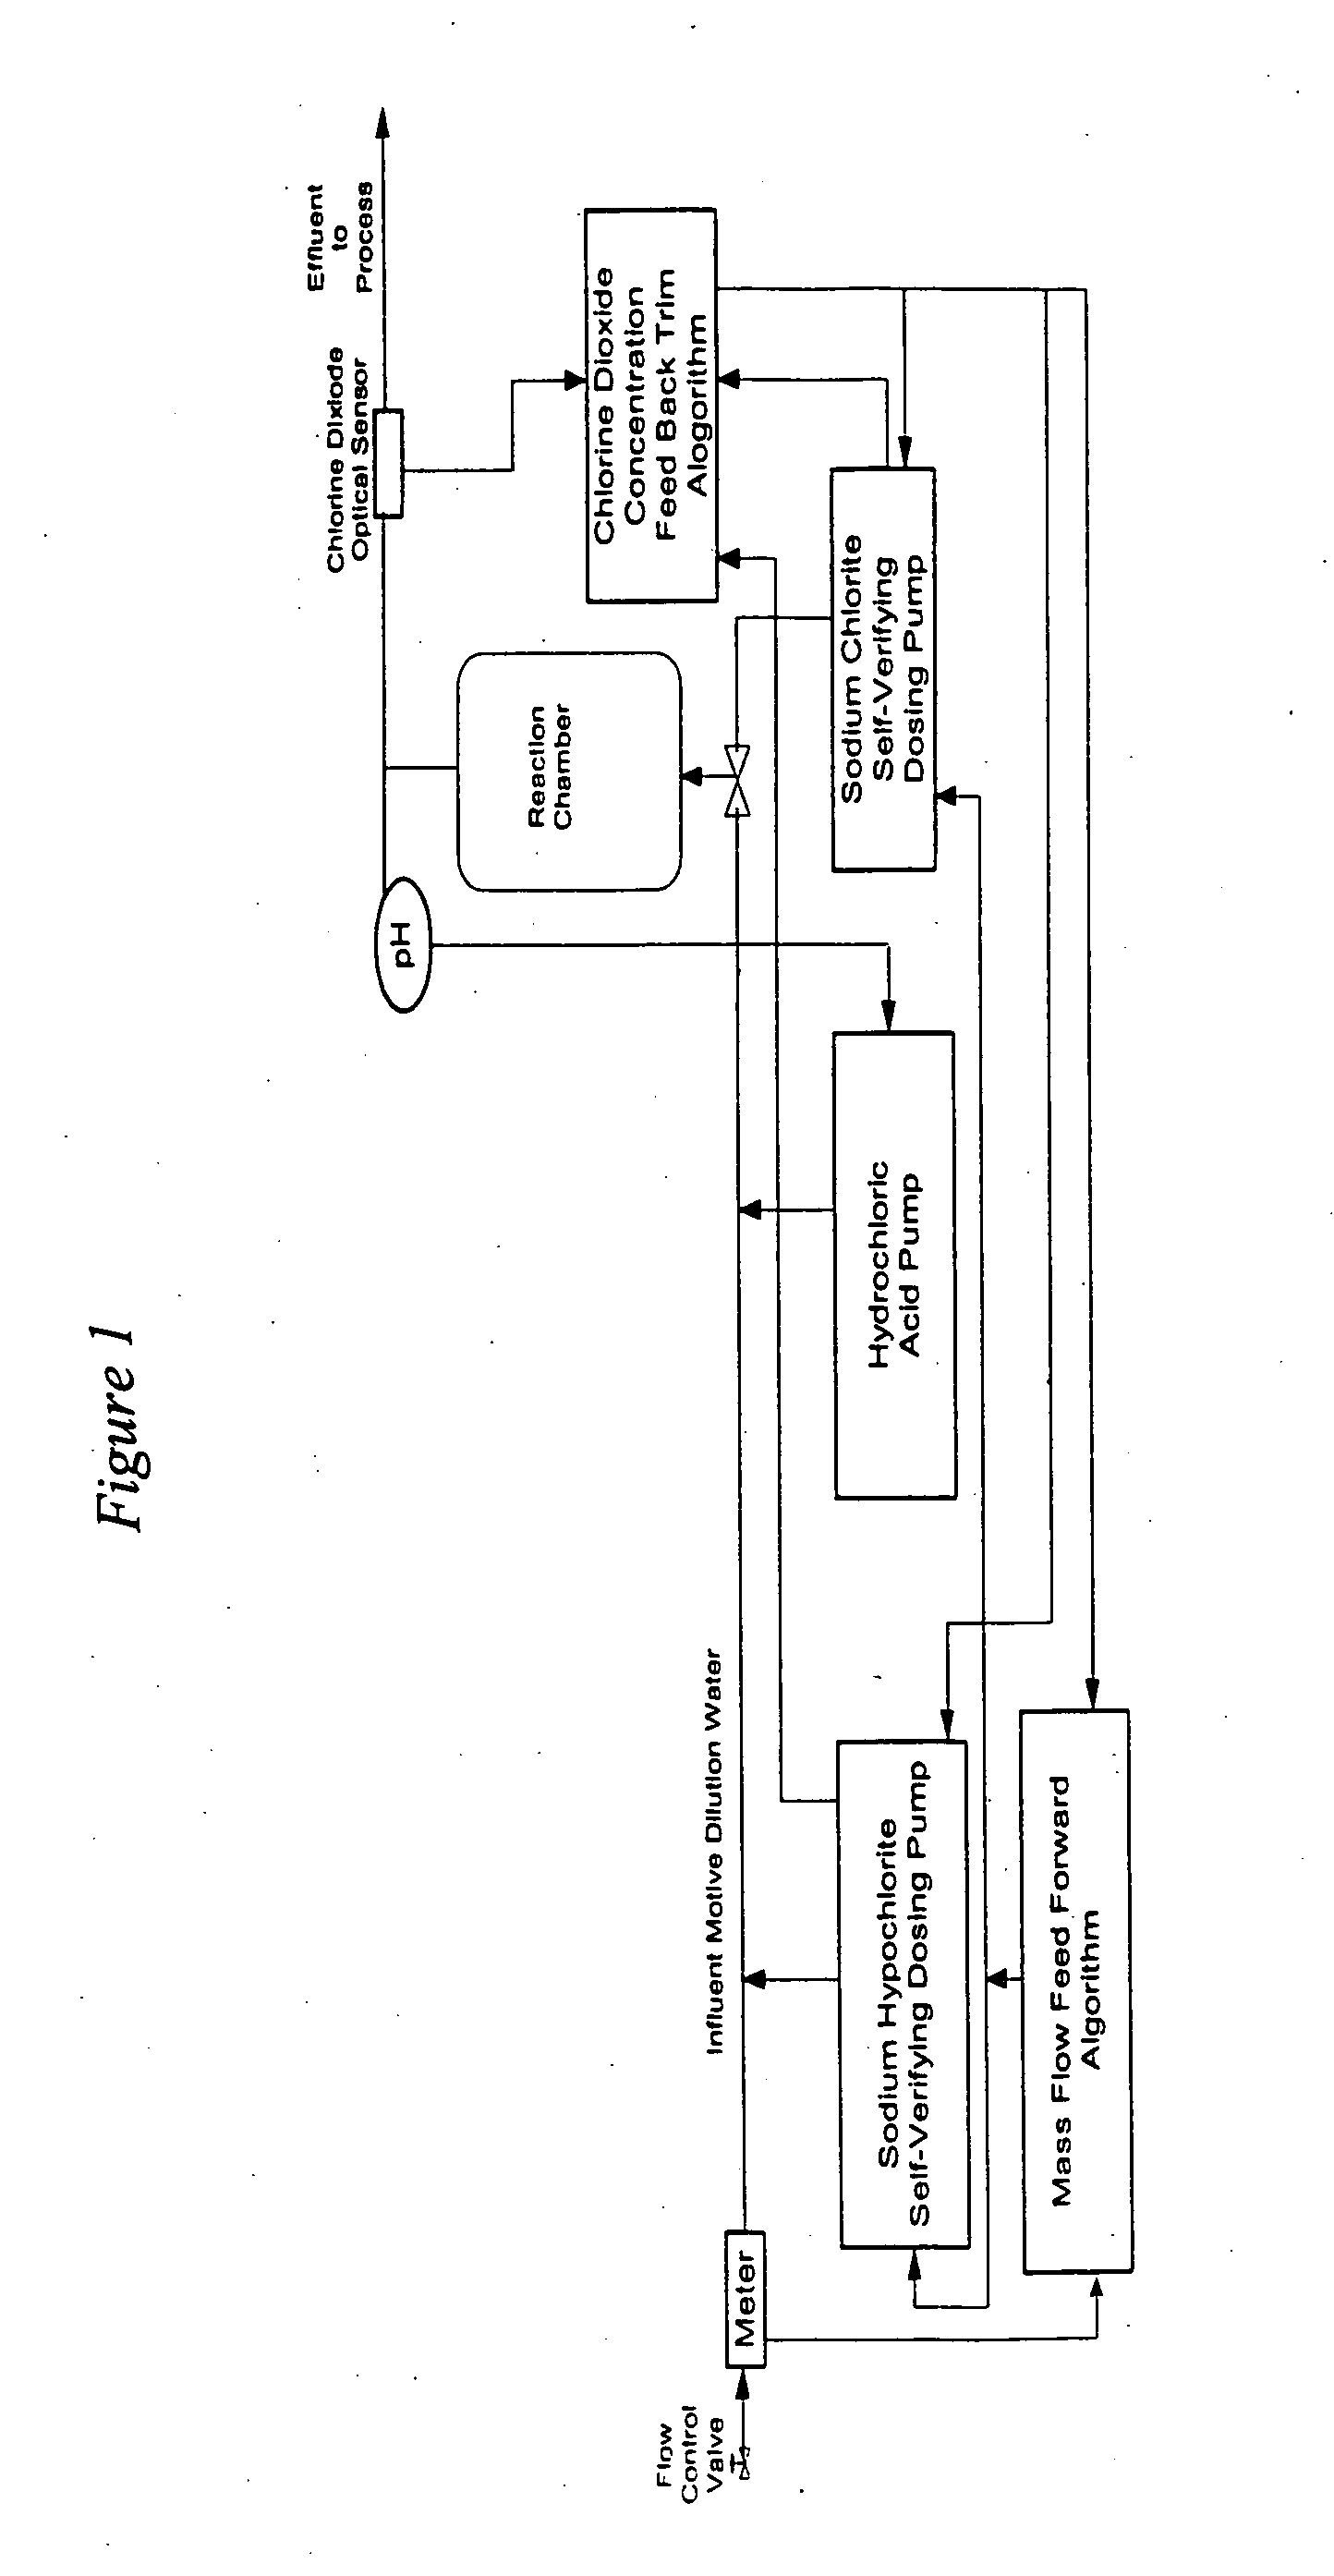 Process for treating an aqueous system with chlorine dioxide